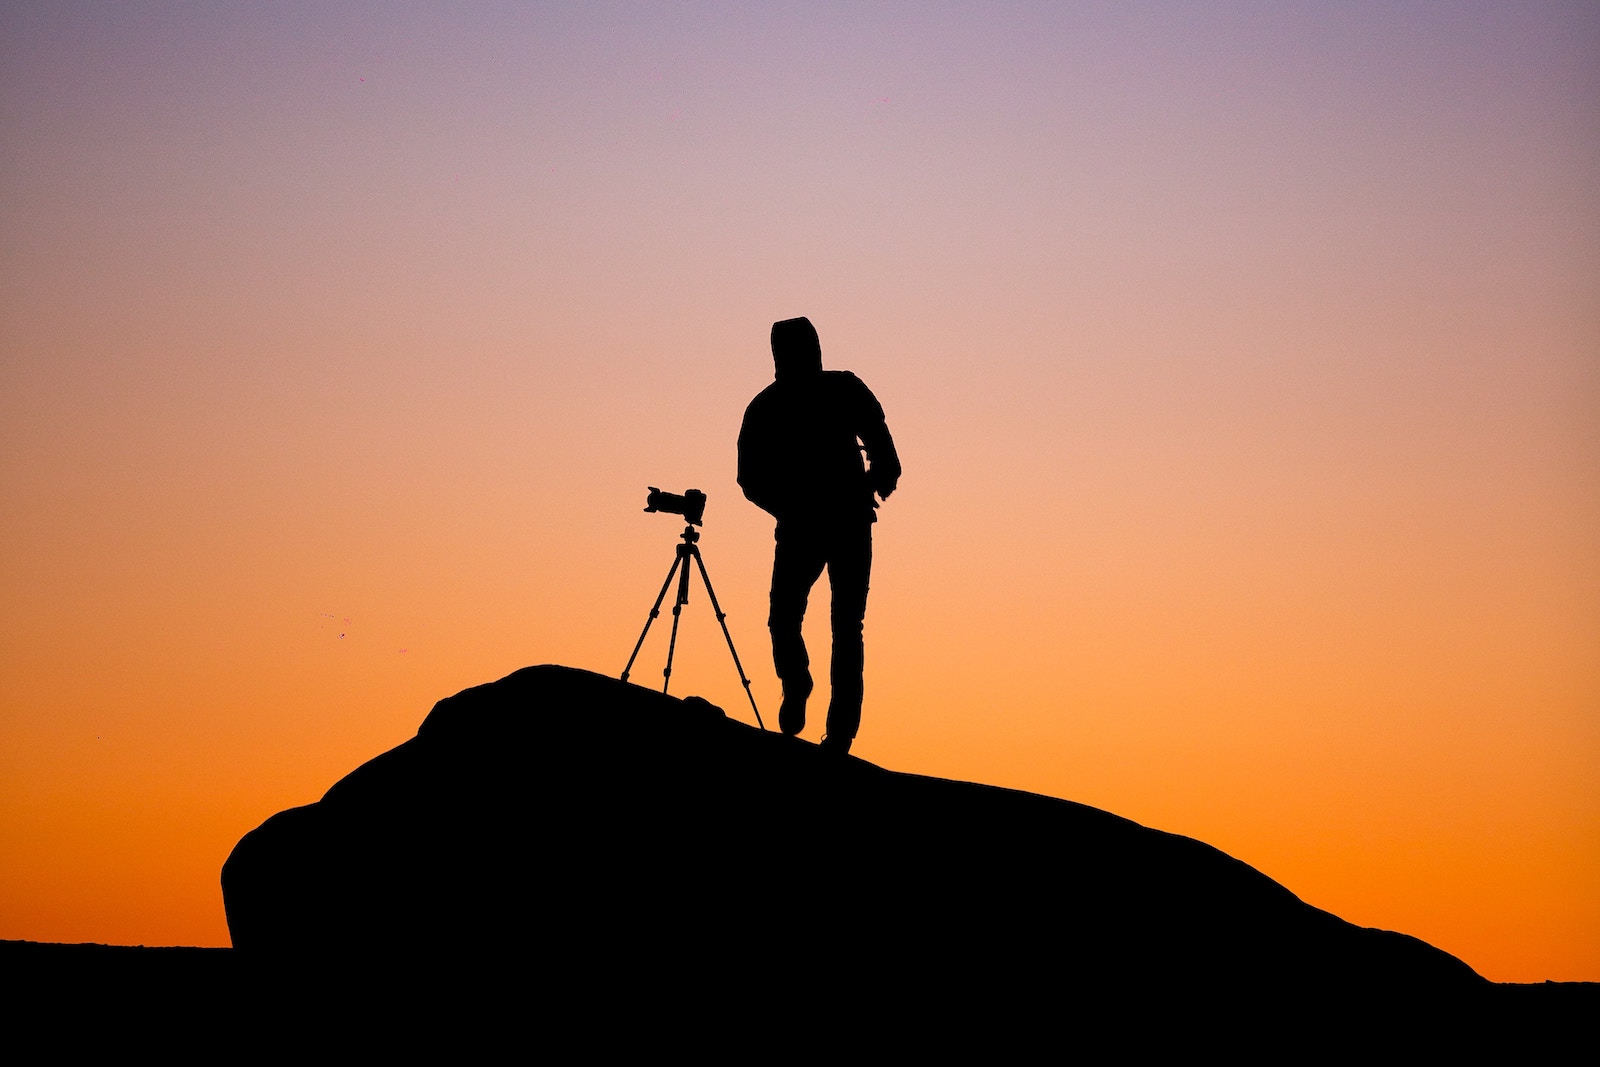 Silhouette of person standing beside camera at sunset